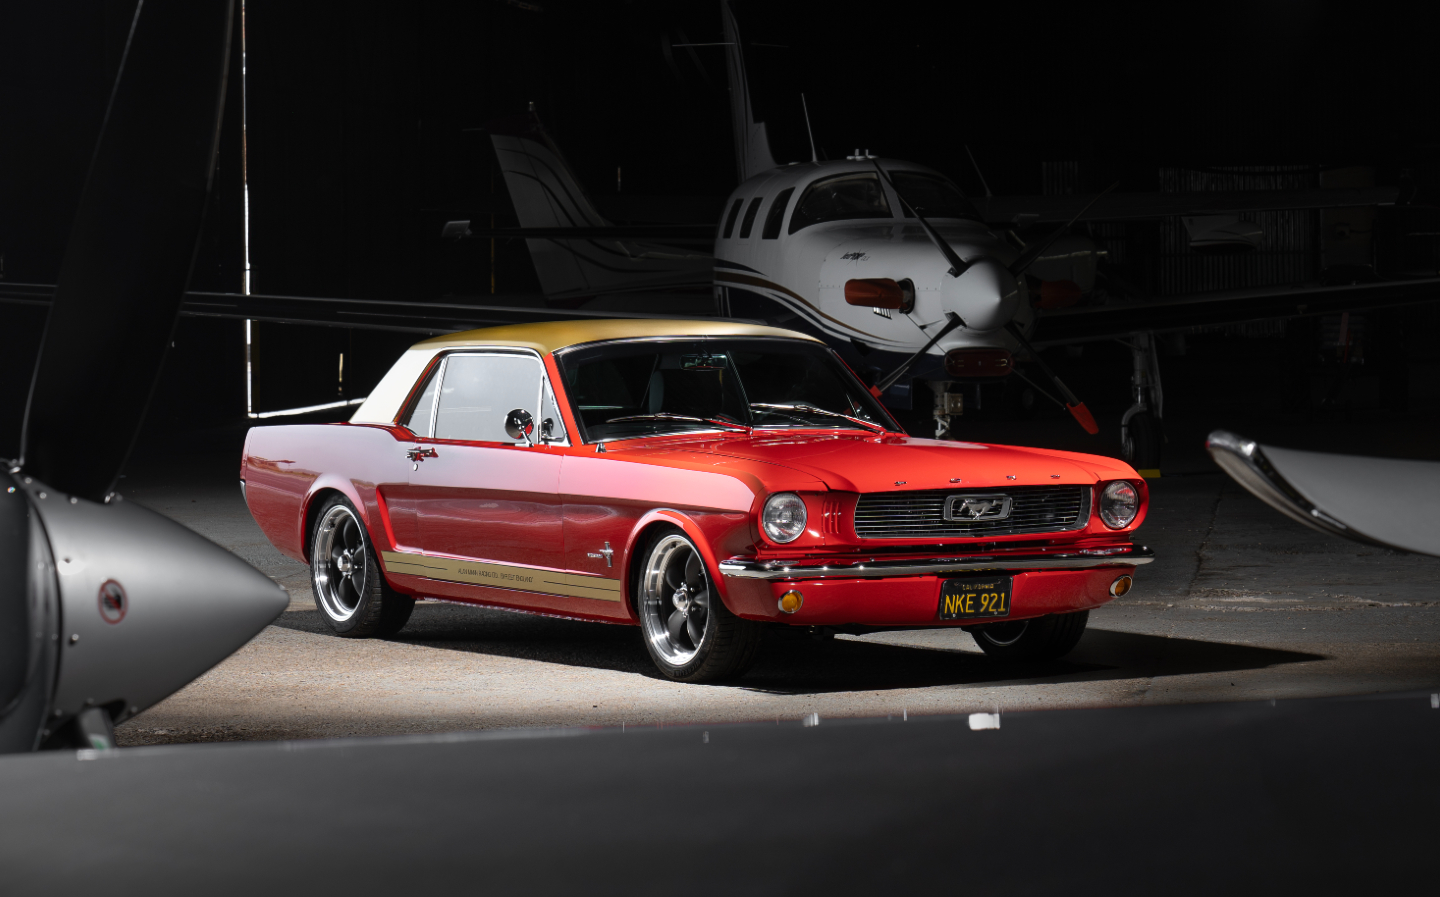 alan mann racing, electric car conversions, electric cars, epower mustang, mustang, alan mann racing shows off electric ford mustang mk1 restomod